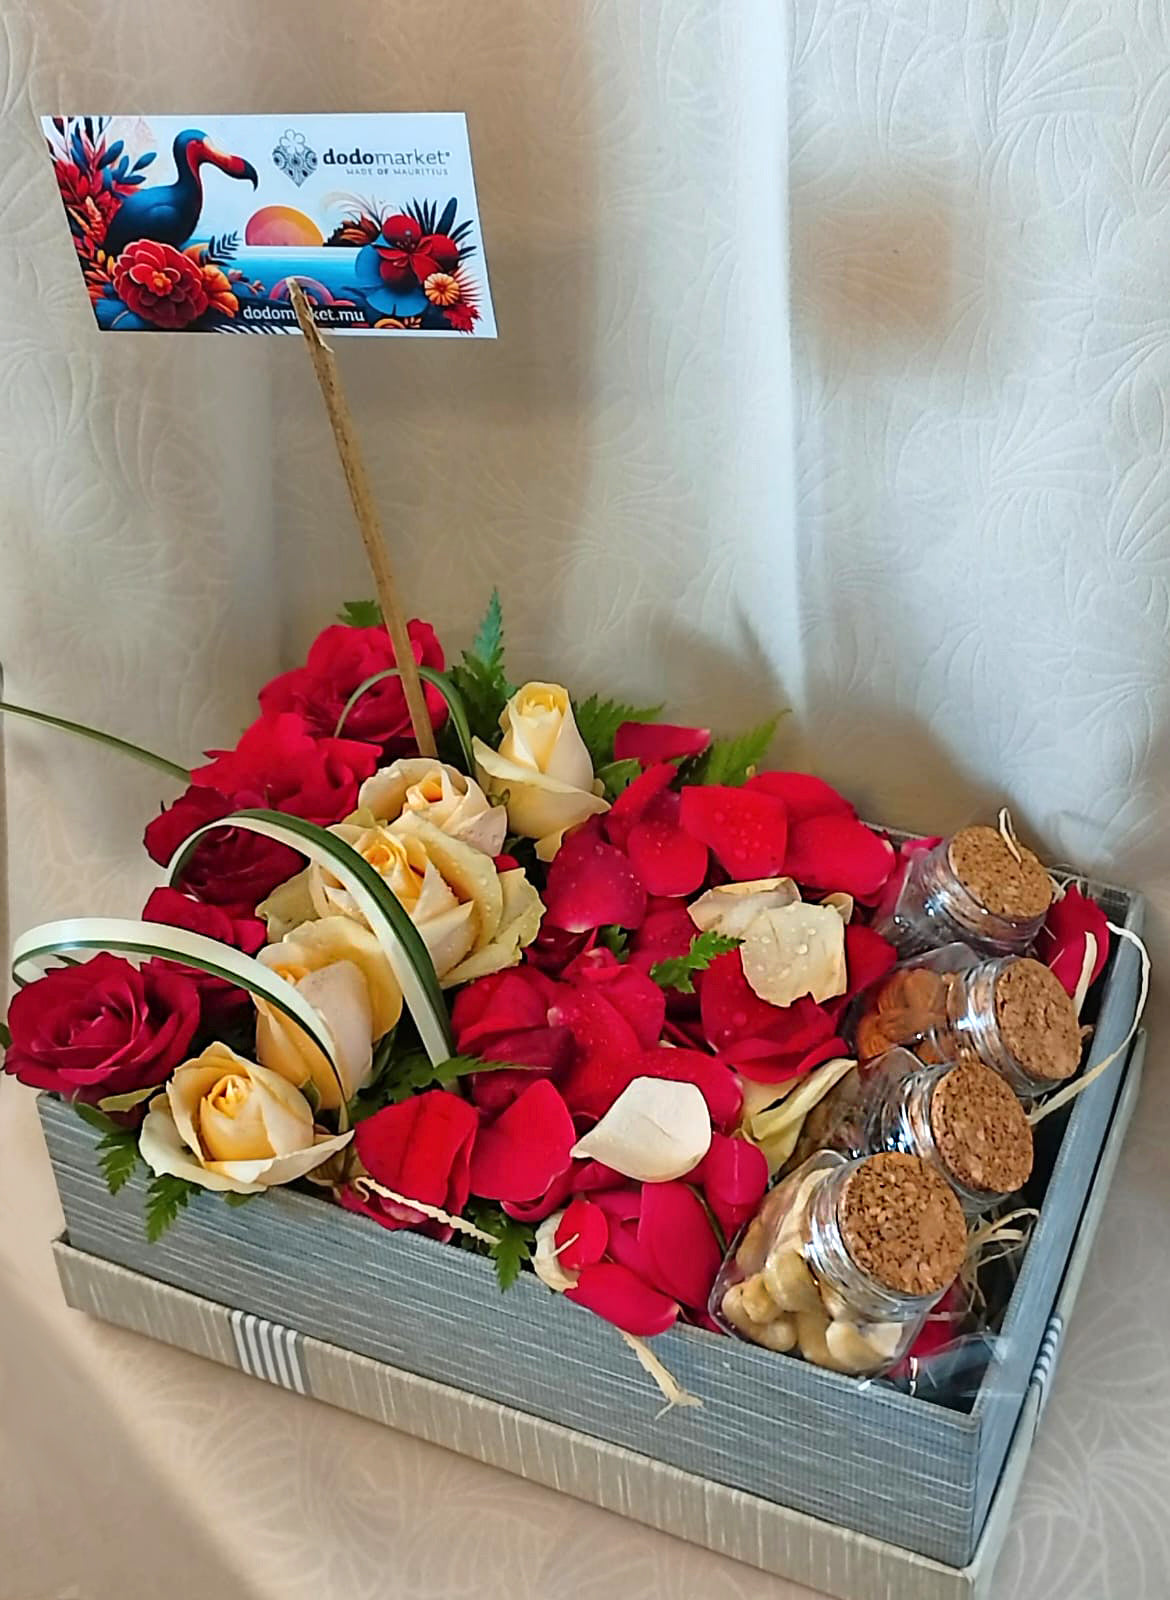 Alhadaya-Hamper-at-home-gift-Flowers-dates-nuts-DodoMarket-delivery-Mauritius